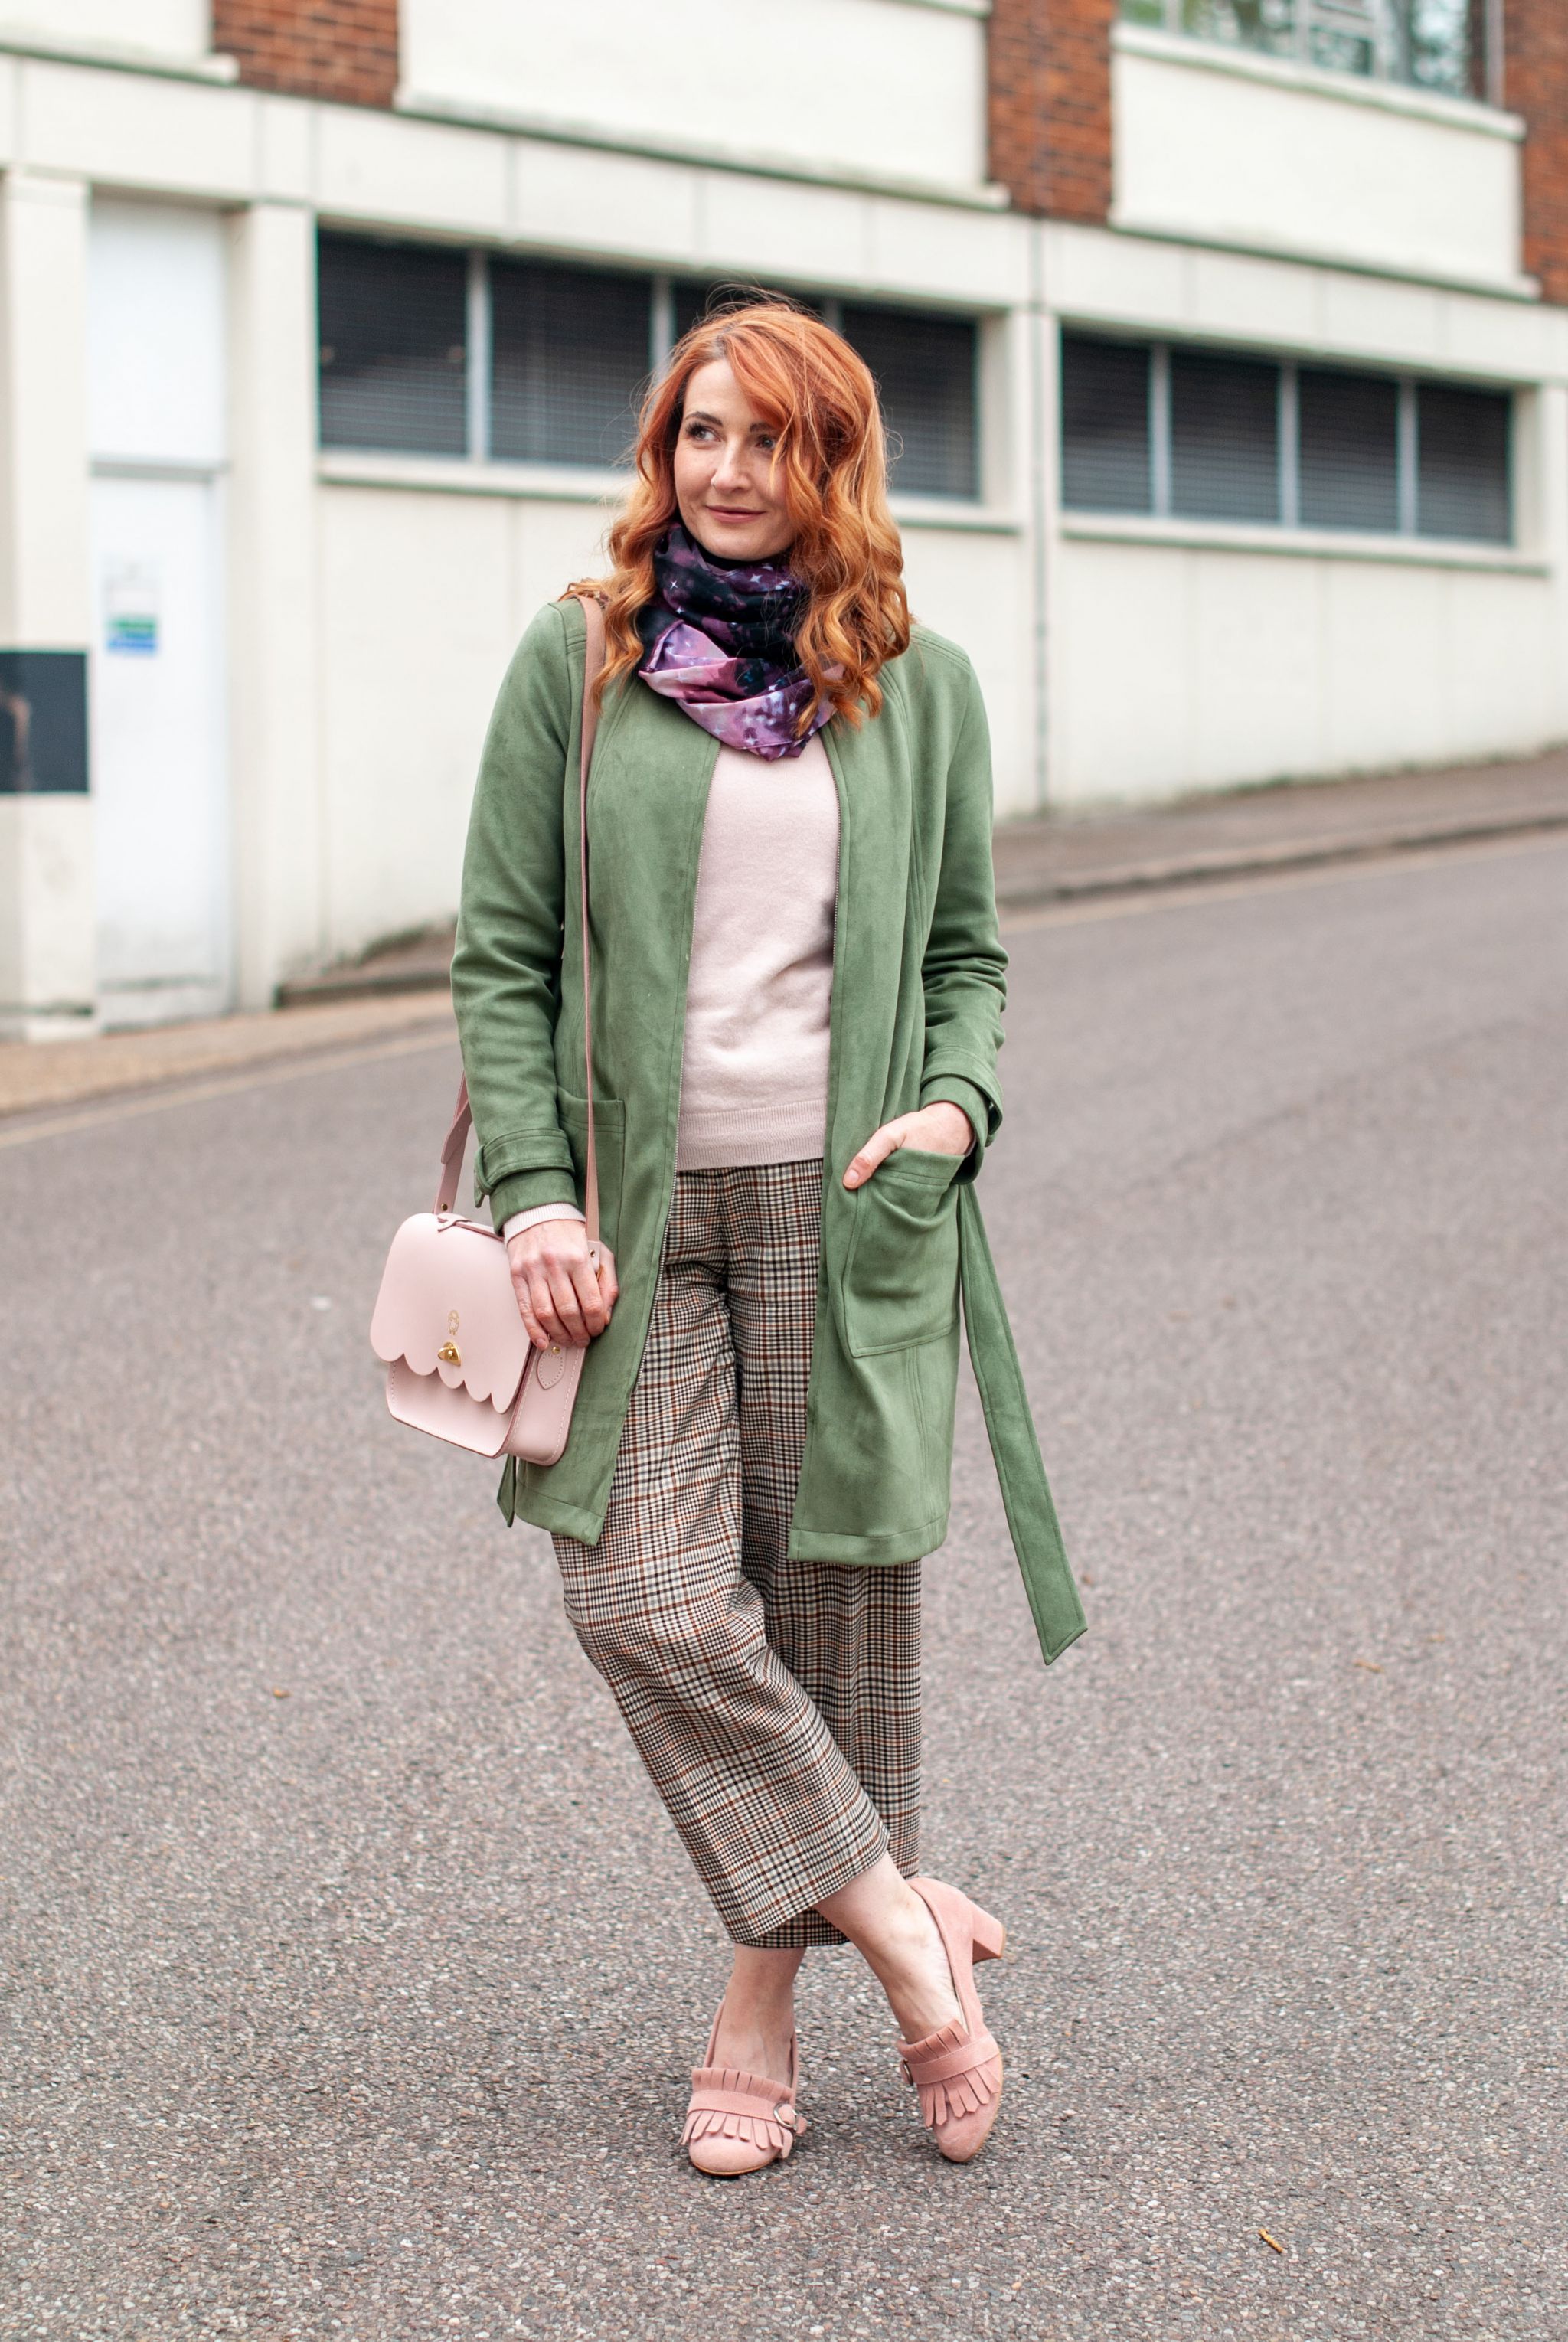 Smart Dressing in Khaki and Pink for ...